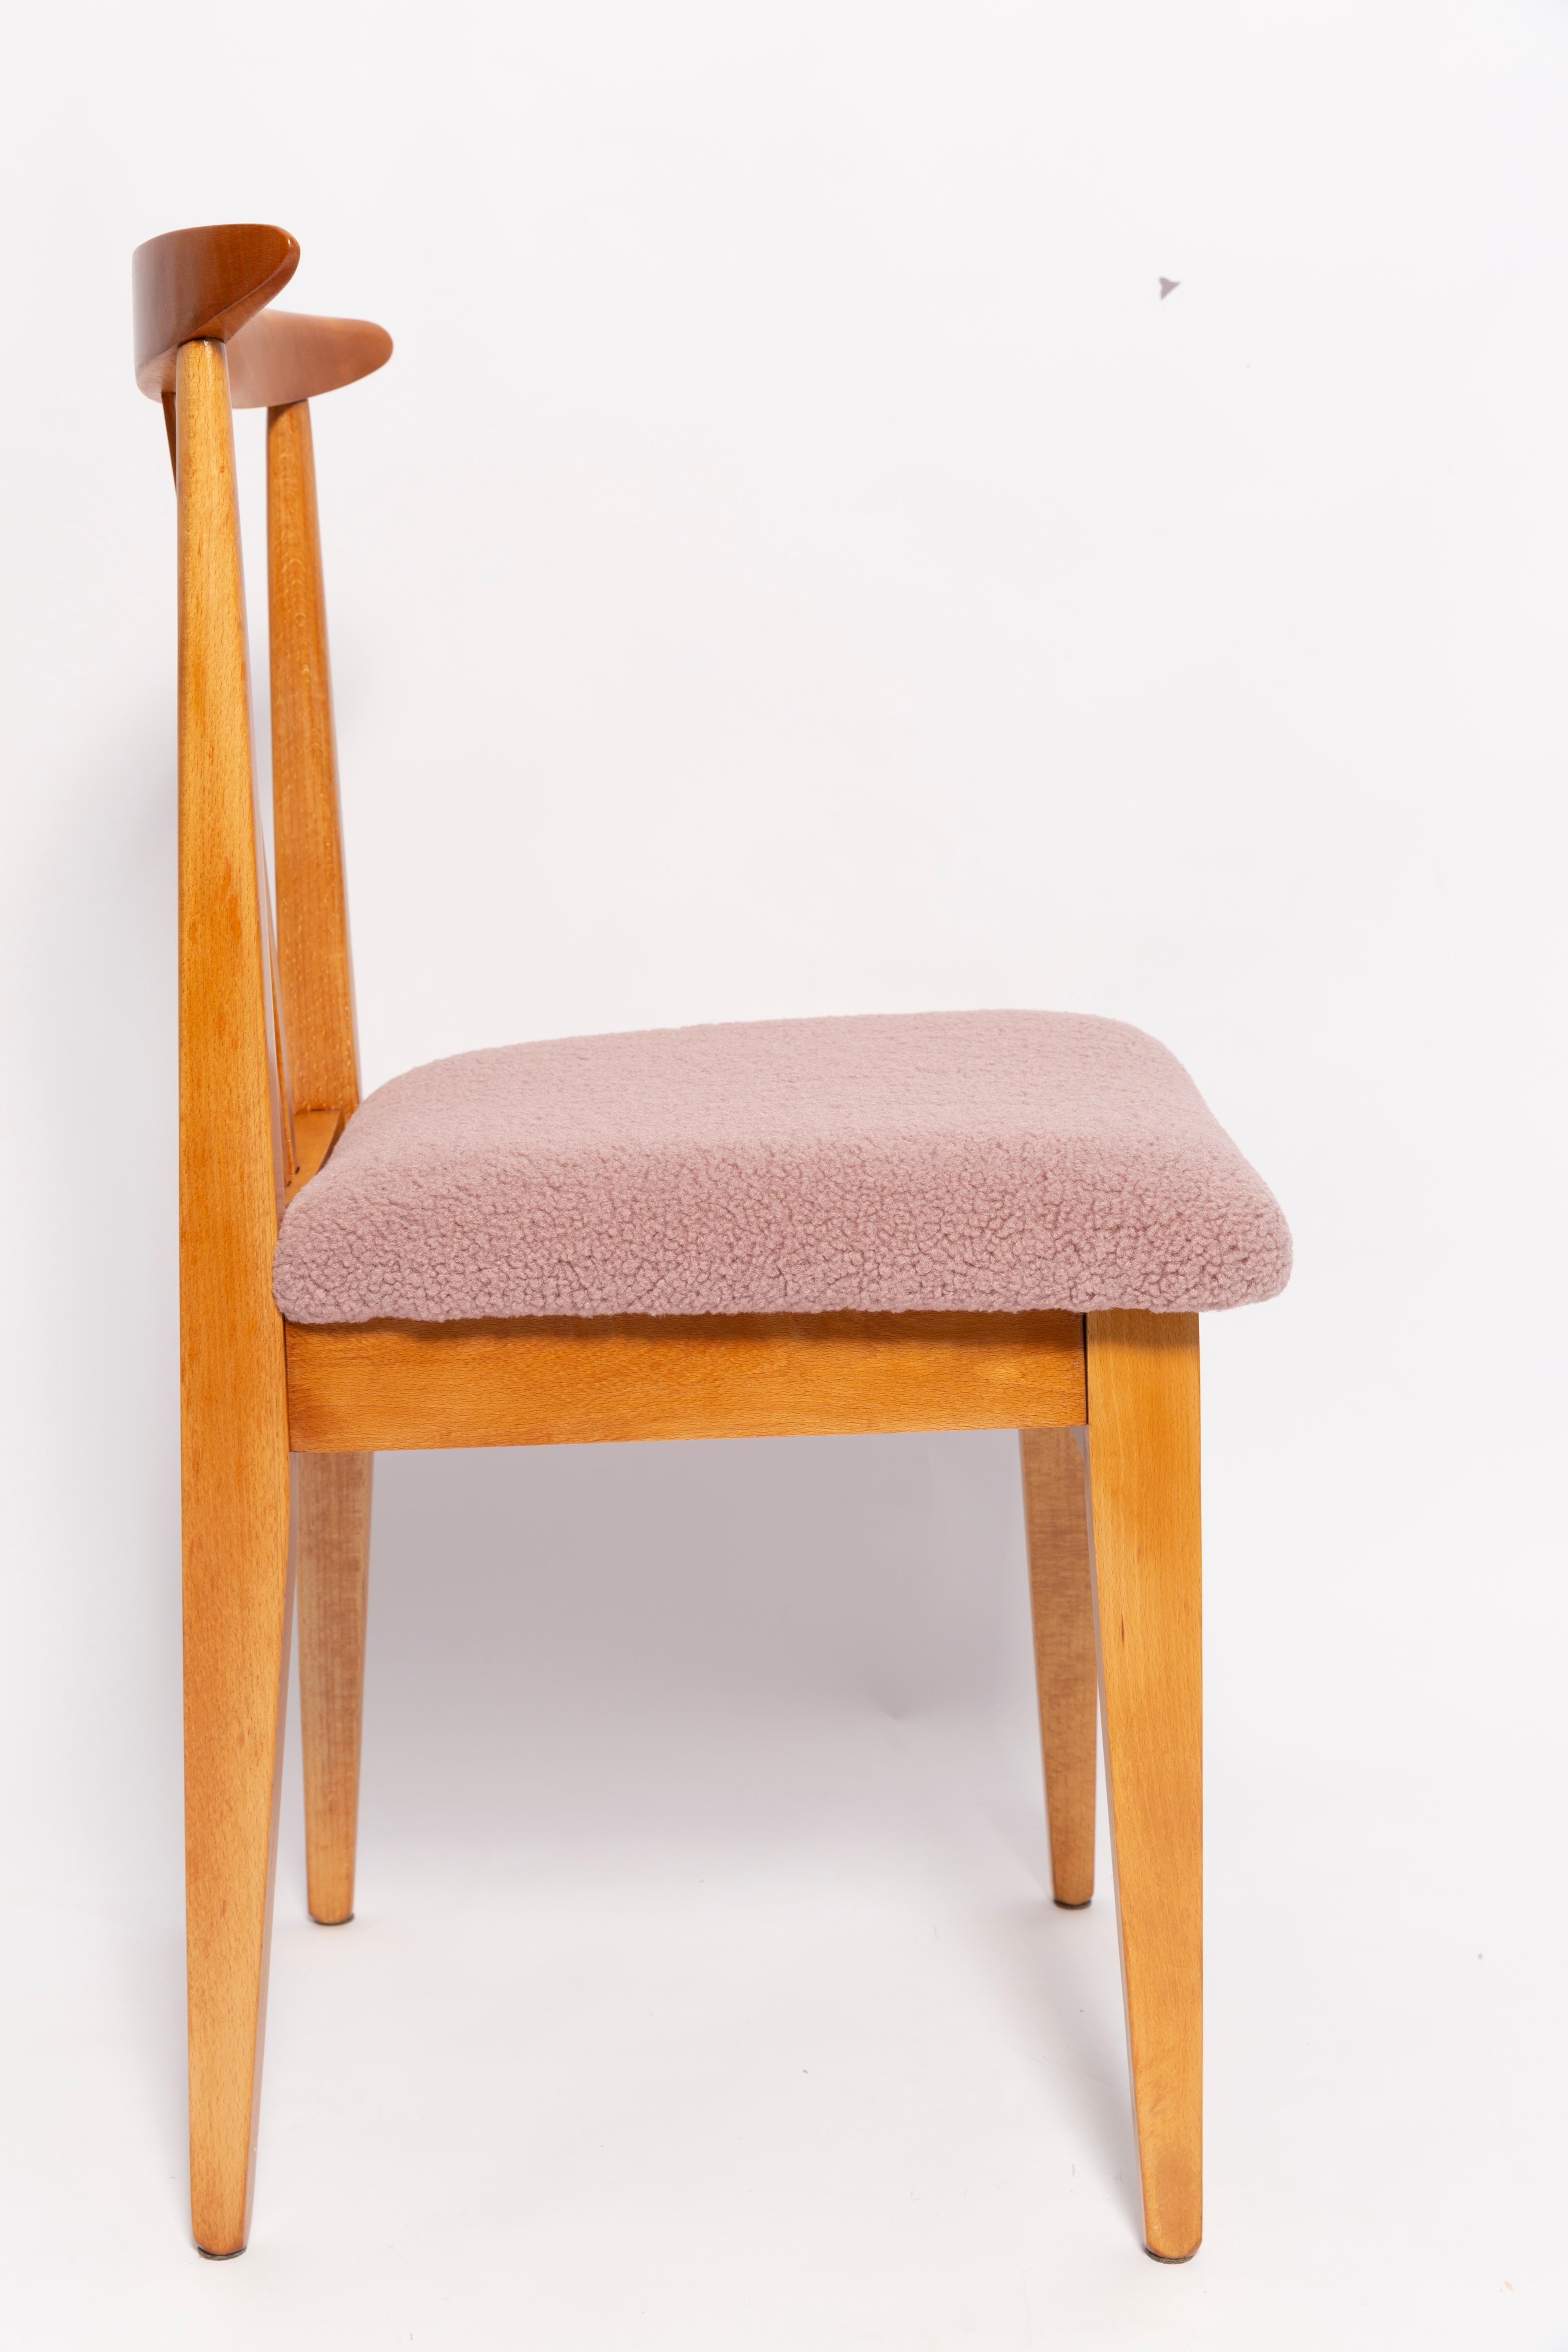 20th Century Mid-Century Pink Blush Boucle Chair, Light Wood, by M. Zielinski, Europe, 1960s For Sale